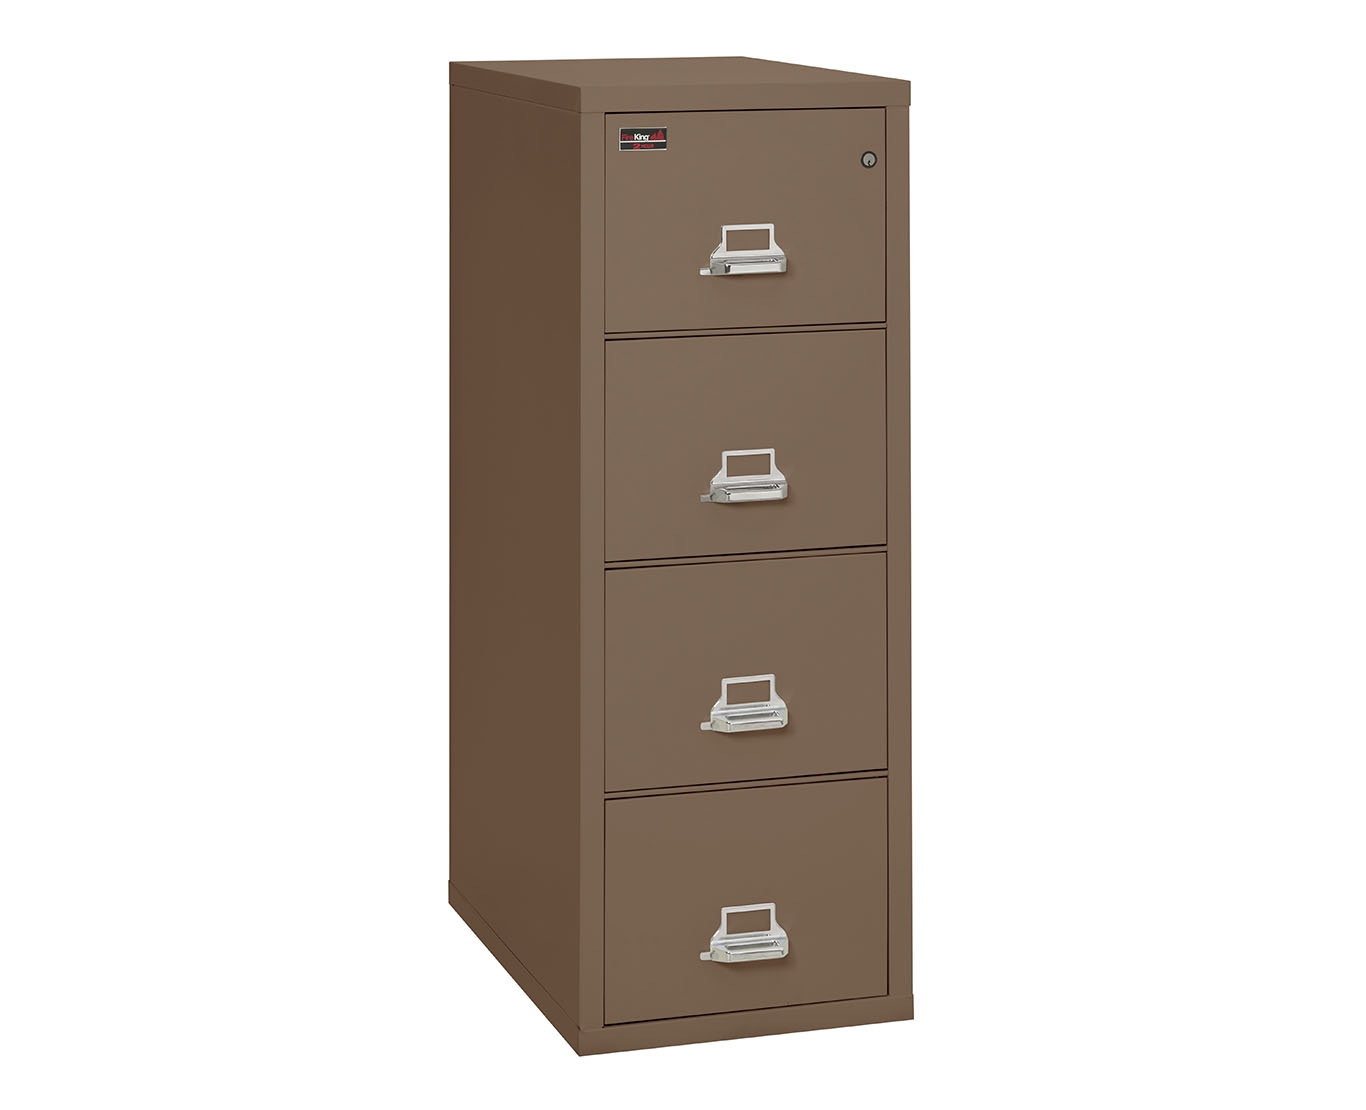 7 Images How Much Does A 4 Drawer Fireproof File